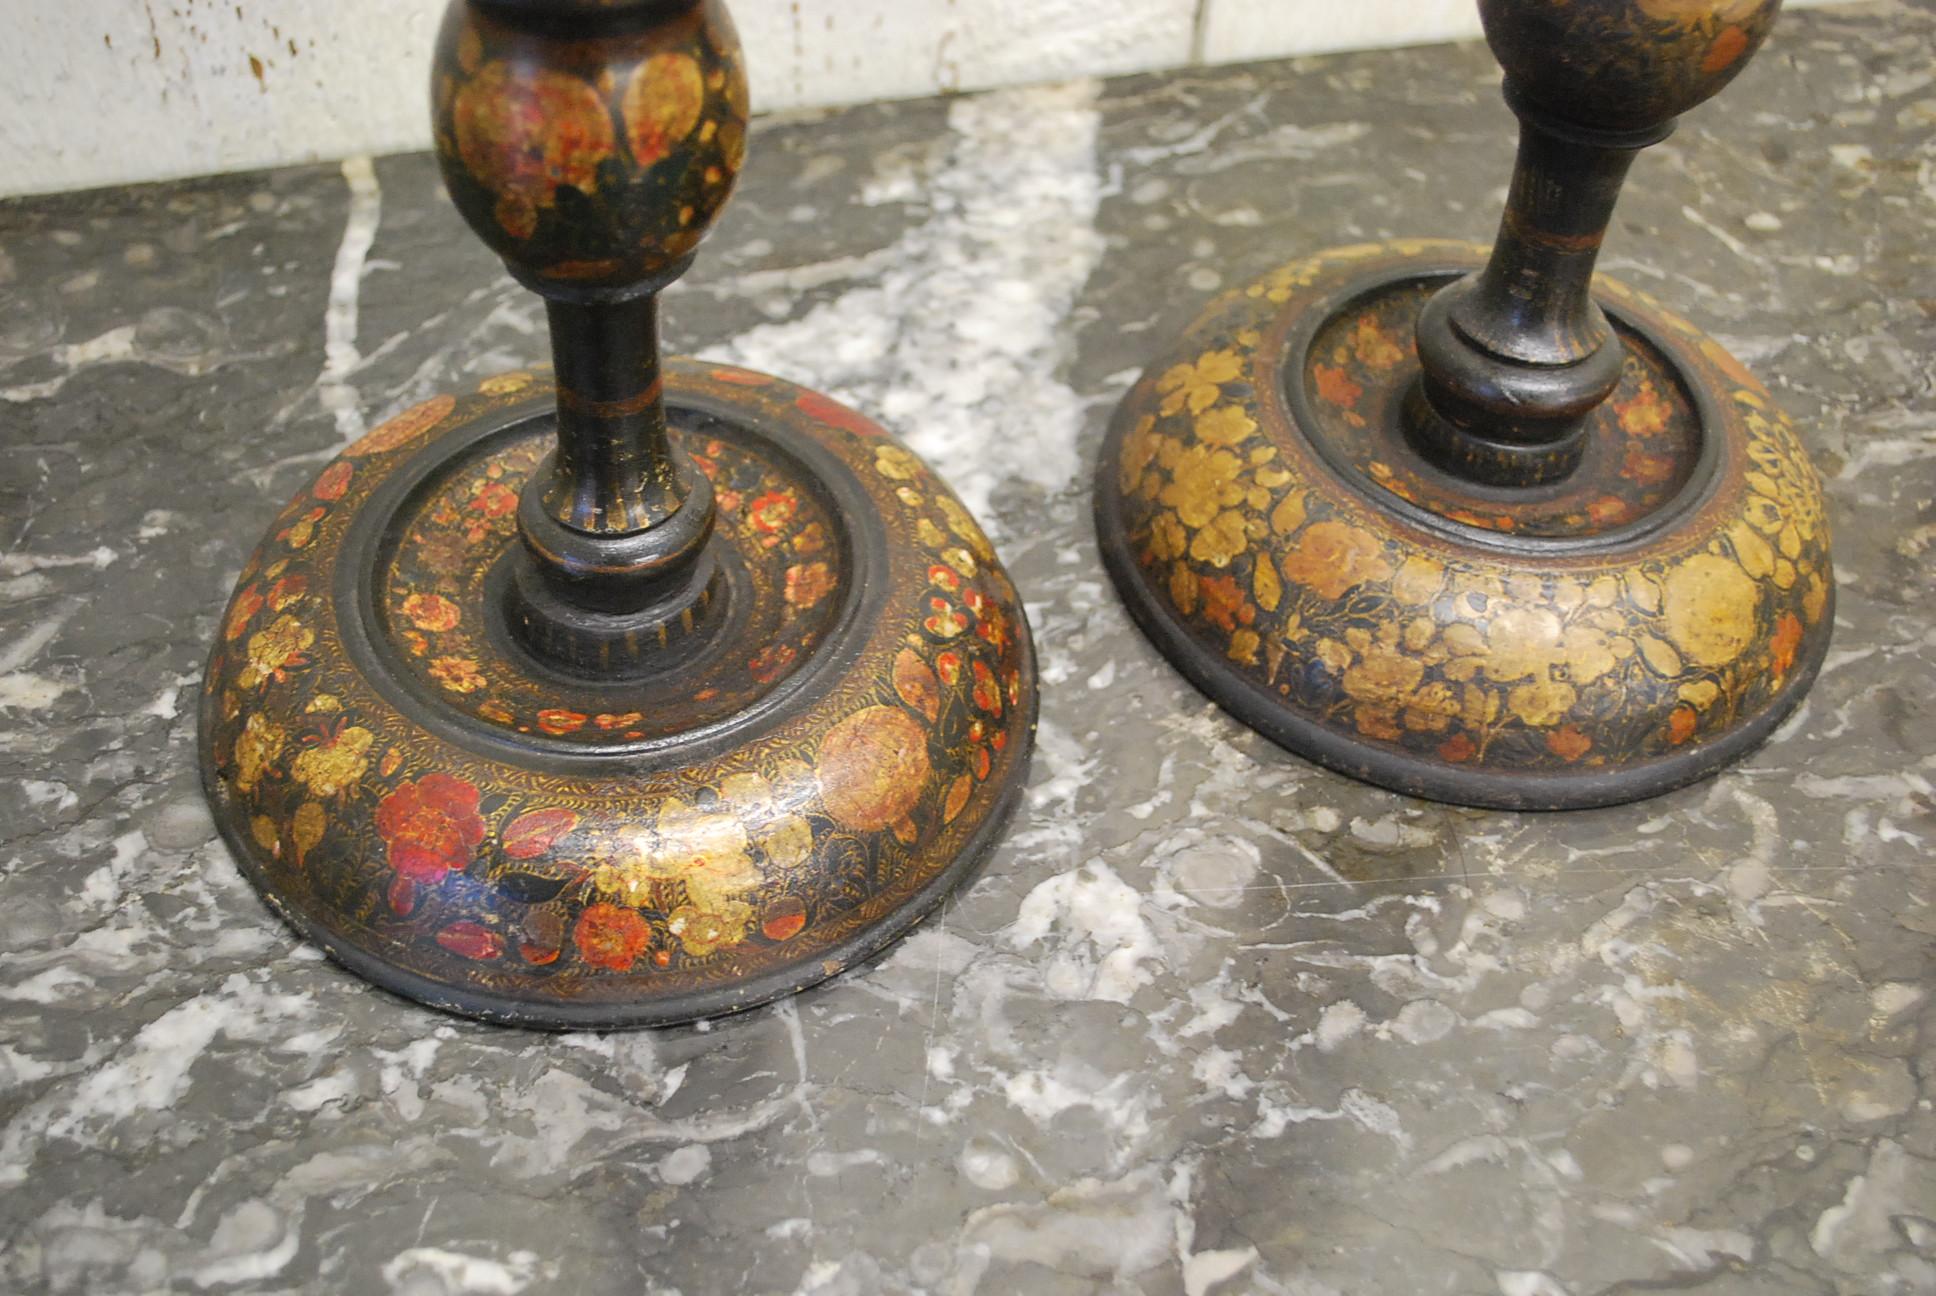 A very good near pair of antique Kashmiri candlesticks of good large proportions with open twisted centres. Turned in wood and then embellished in hand painted decoration. Highly sought after in the decorative market and difficult to find in large